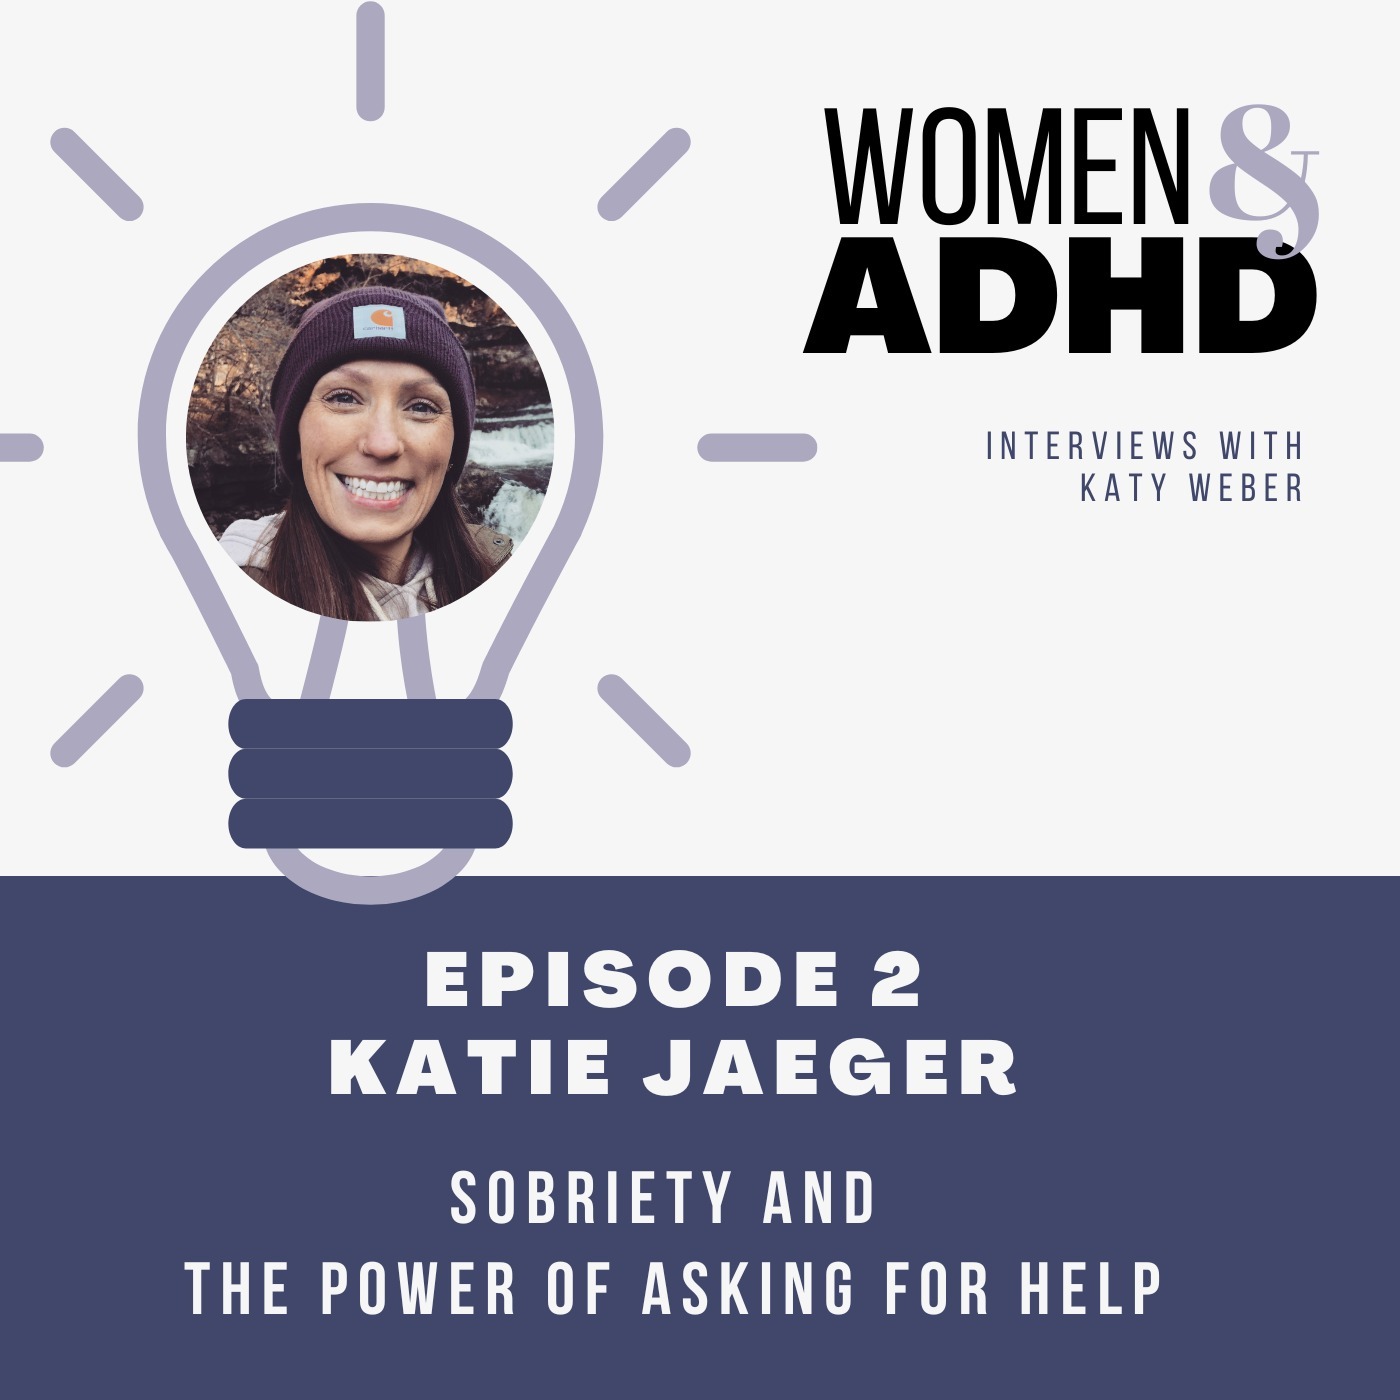 Katie Jaeger: Sobriety and the power of asking for help